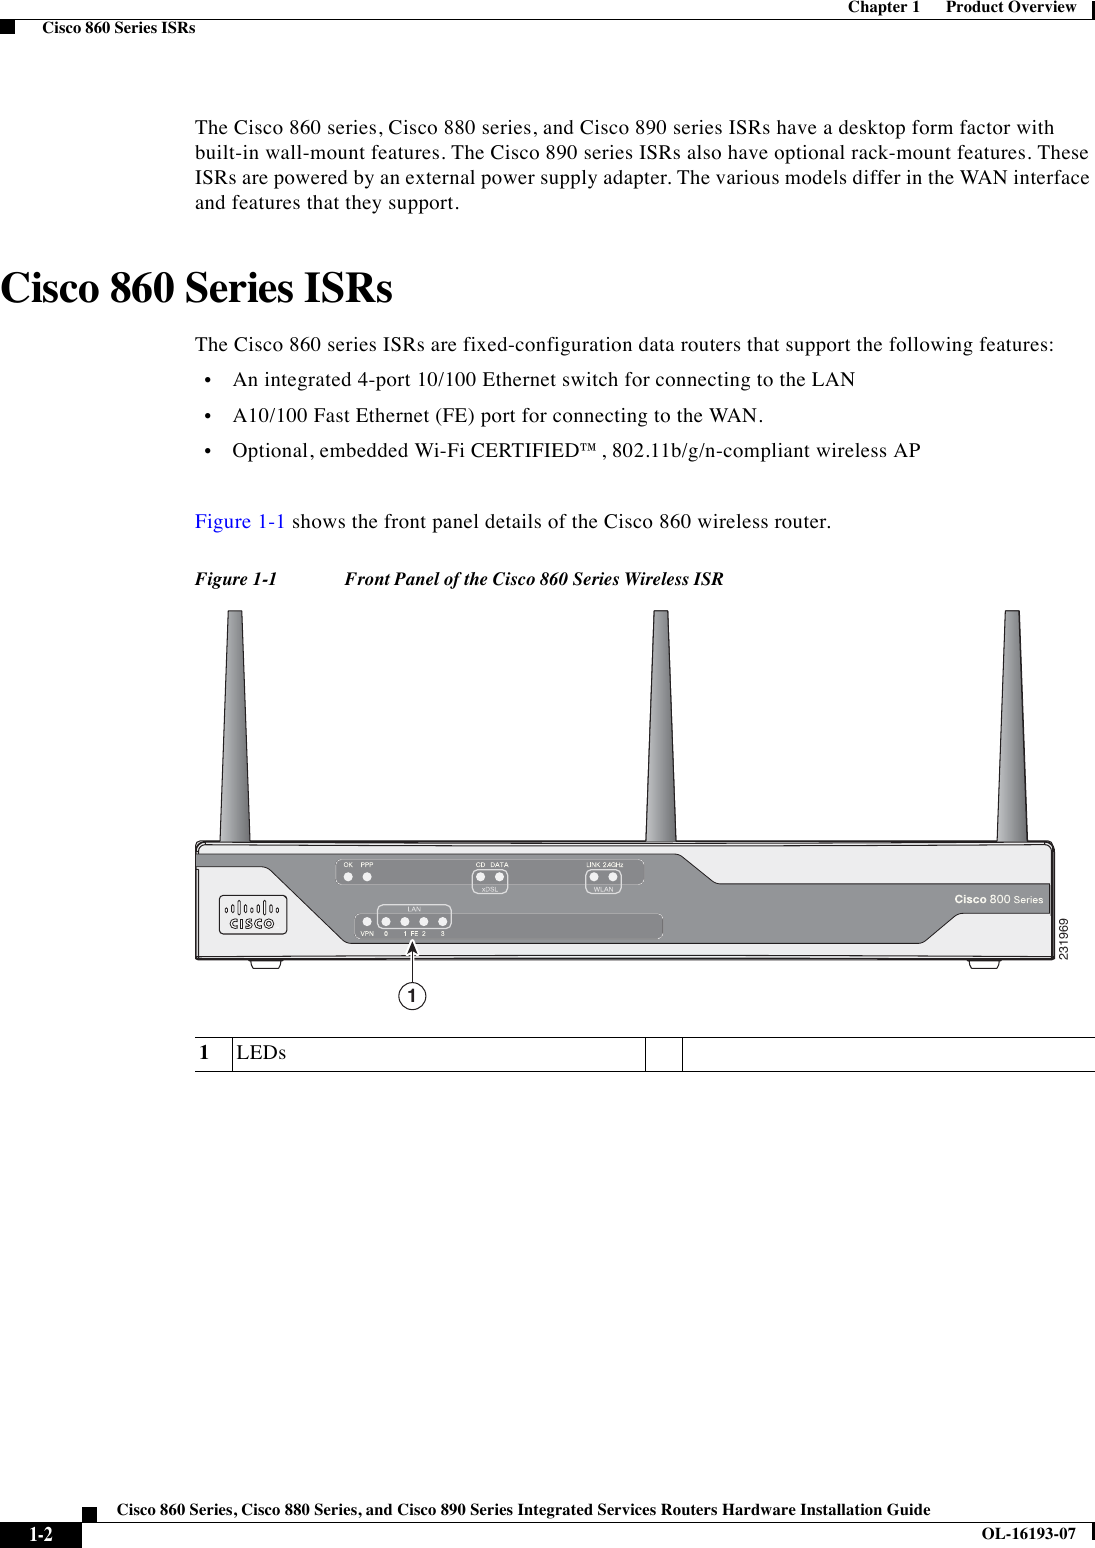  1-2Cisco 860 Series, Cisco 880 Series, and Cisco 890 Series Integrated Services Routers Hardware Installation GuideOL-16193-07Chapter 1      Product Overview  Cisco 860 Series ISRsThe Cisco 860 series, Cisco 880 series, and Cisco 890 series ISRs have a desktop form factor with built-in wall-mount features. The Cisco 890 series ISRs also have optional rack-mount features. These ISRs are powered by an external power supply adapter. The various models differ in the WAN interface and features that they support.Cisco 860 Series ISRsThe Cisco 860 series ISRs are fixed-configuration data routers that support the following features:  •An integrated 4-port 10/100 Ethernet switch for connecting to the LAN   •A10/100 Fast Ethernet (FE) port for connecting to the WAN.  •Optional, embedded Wi-Fi CERTIFIED™, 802.11b/g/n-compliant wireless APFigure 1-1 shows the front panel details of the Cisco 860 wireless router.Figure 1-1 Front Panel of the Cisco 860 Series Wireless ISR1LEDs2319691